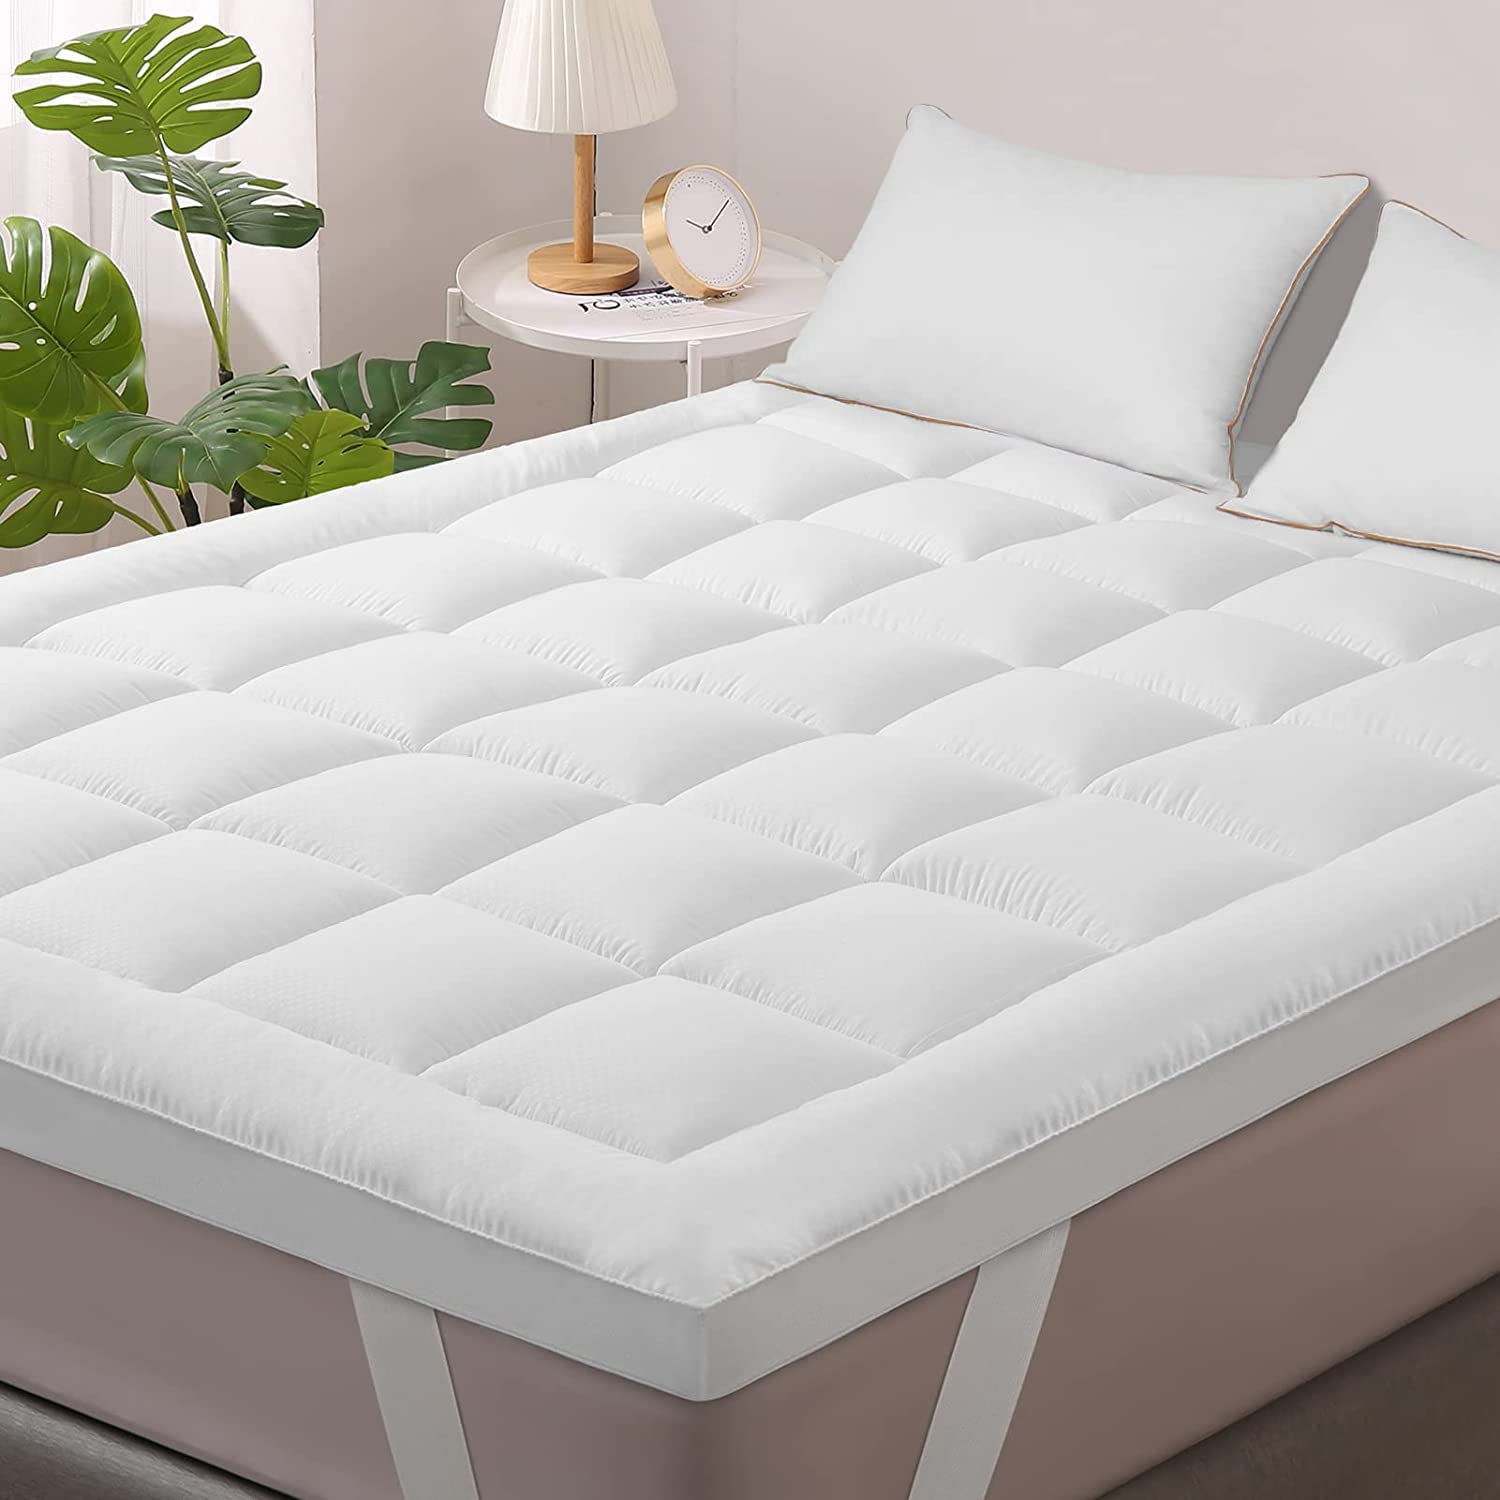 LUTE memory foam mattress topper Double bed,5 cm Thick With 900 GSM Filling, quilted mattress protector, Soft Microfiber cooling mattress Topper with Elasticated Straps(135x190CM)